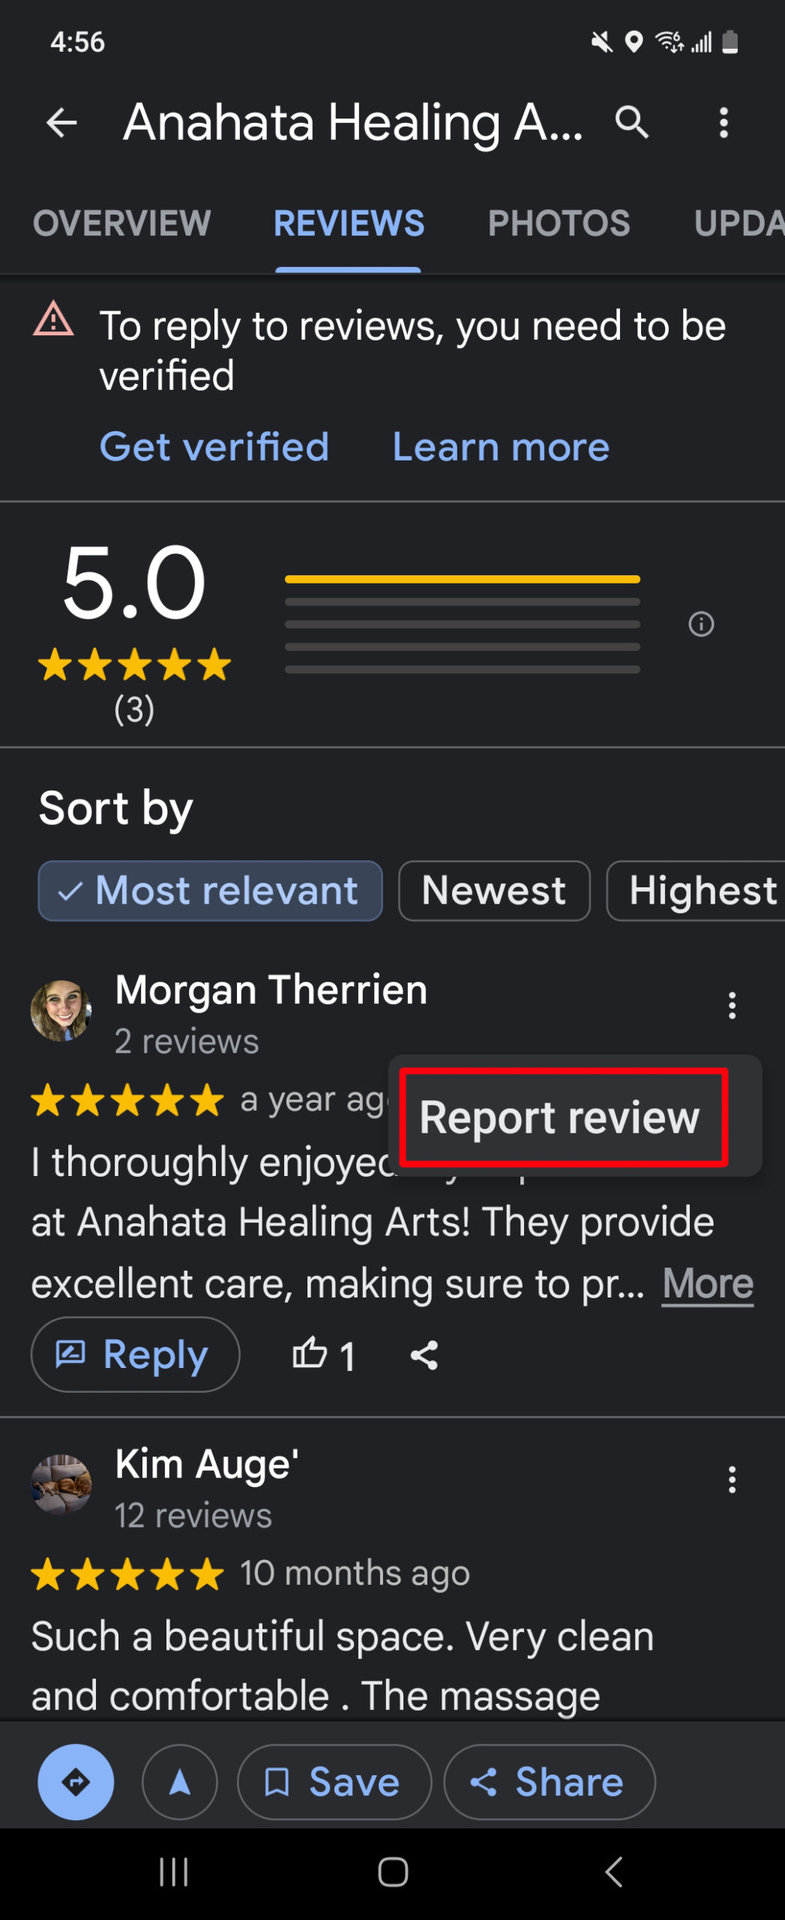 Report Review